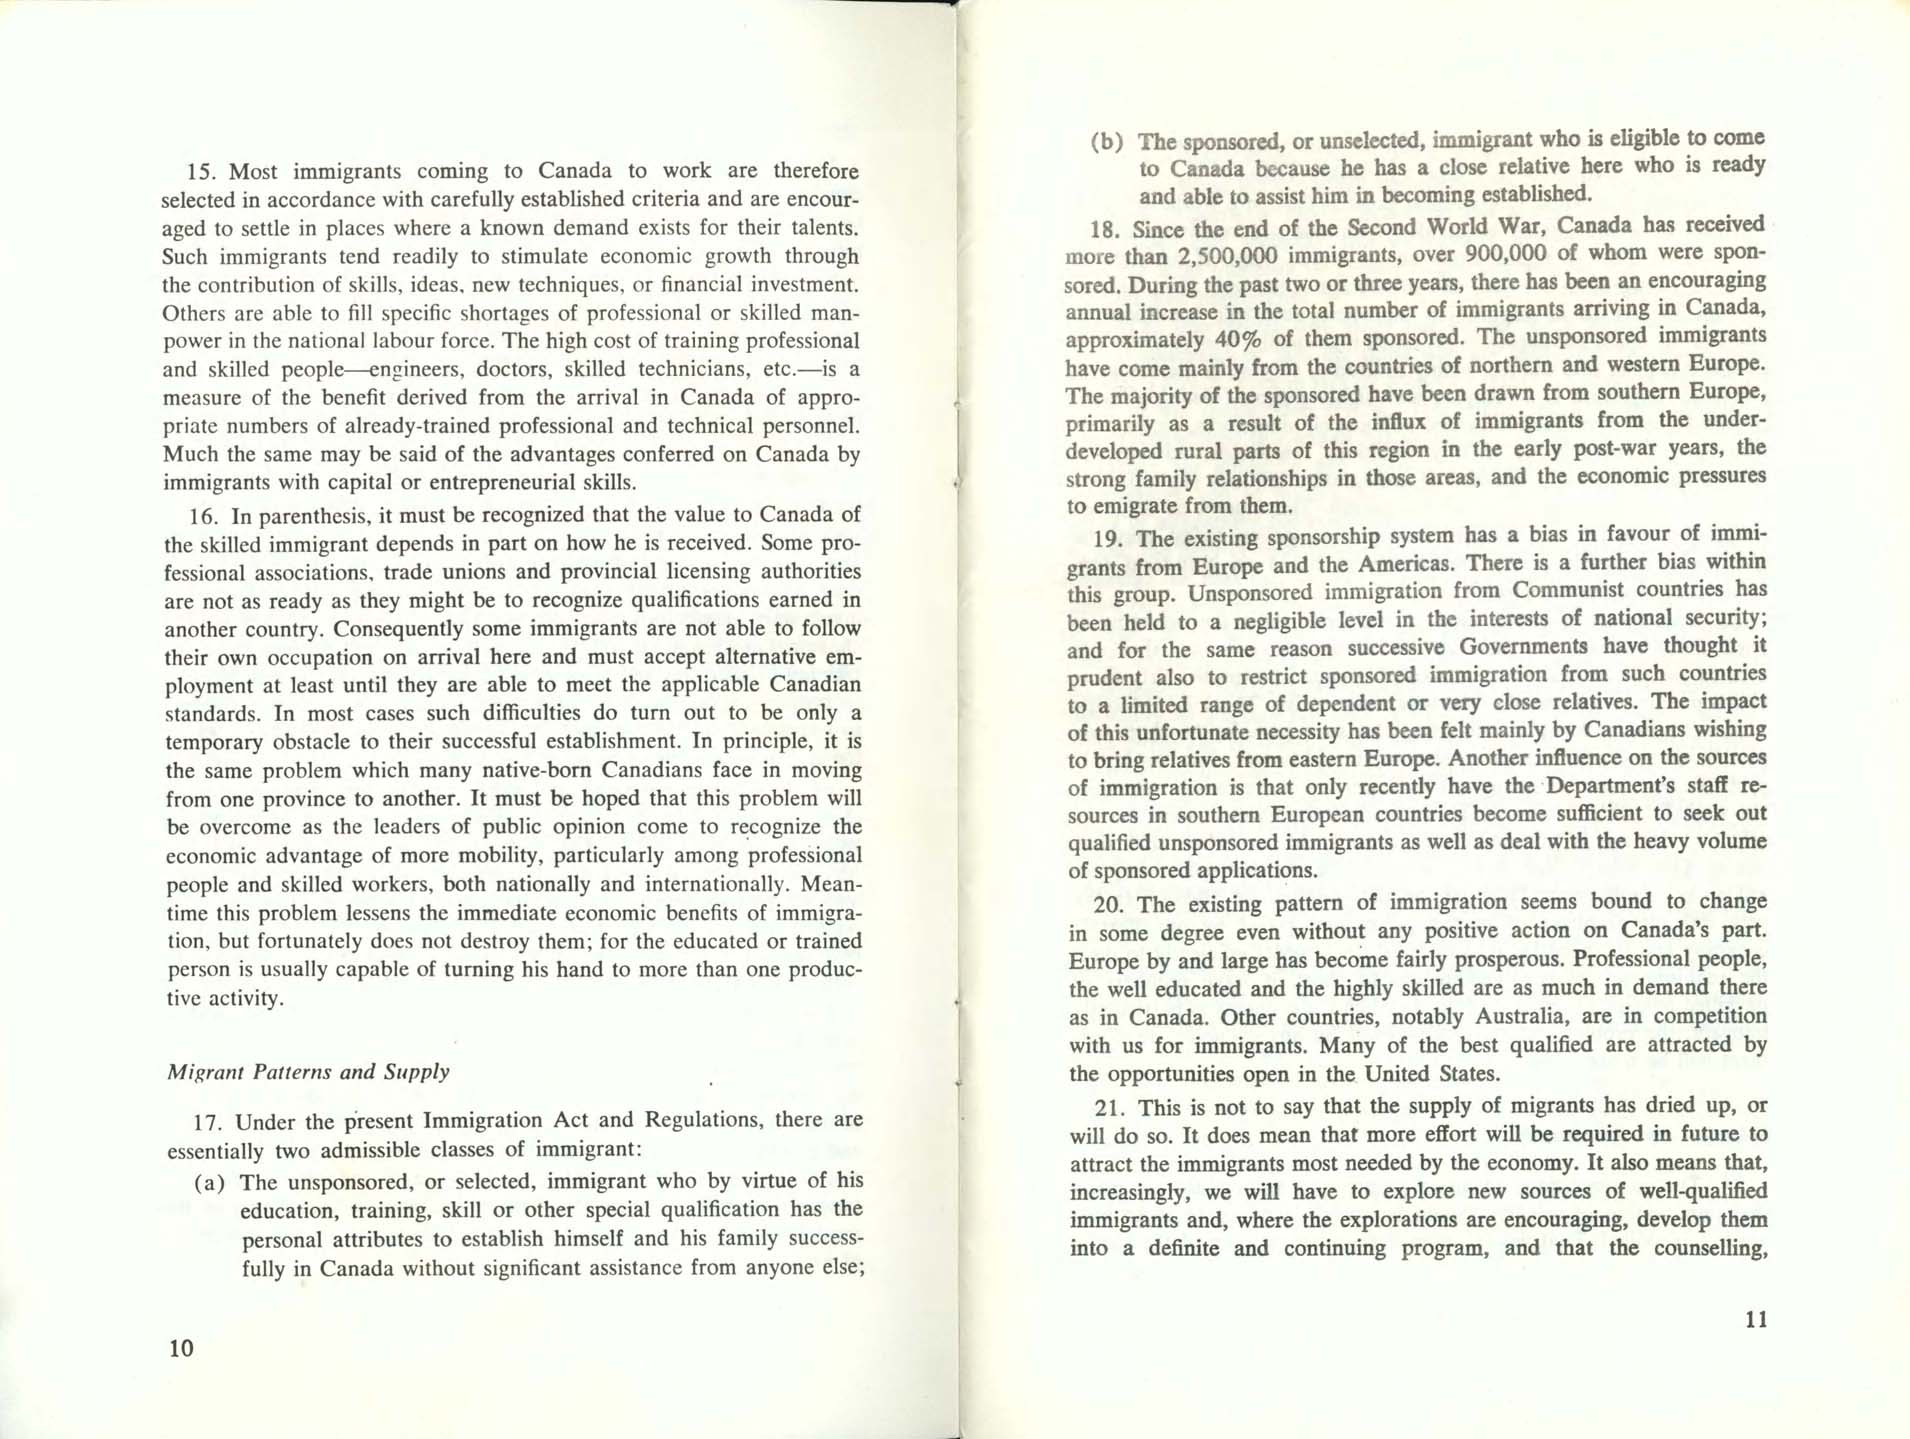 Page 10, 11 White Paper on Immigration, 1966